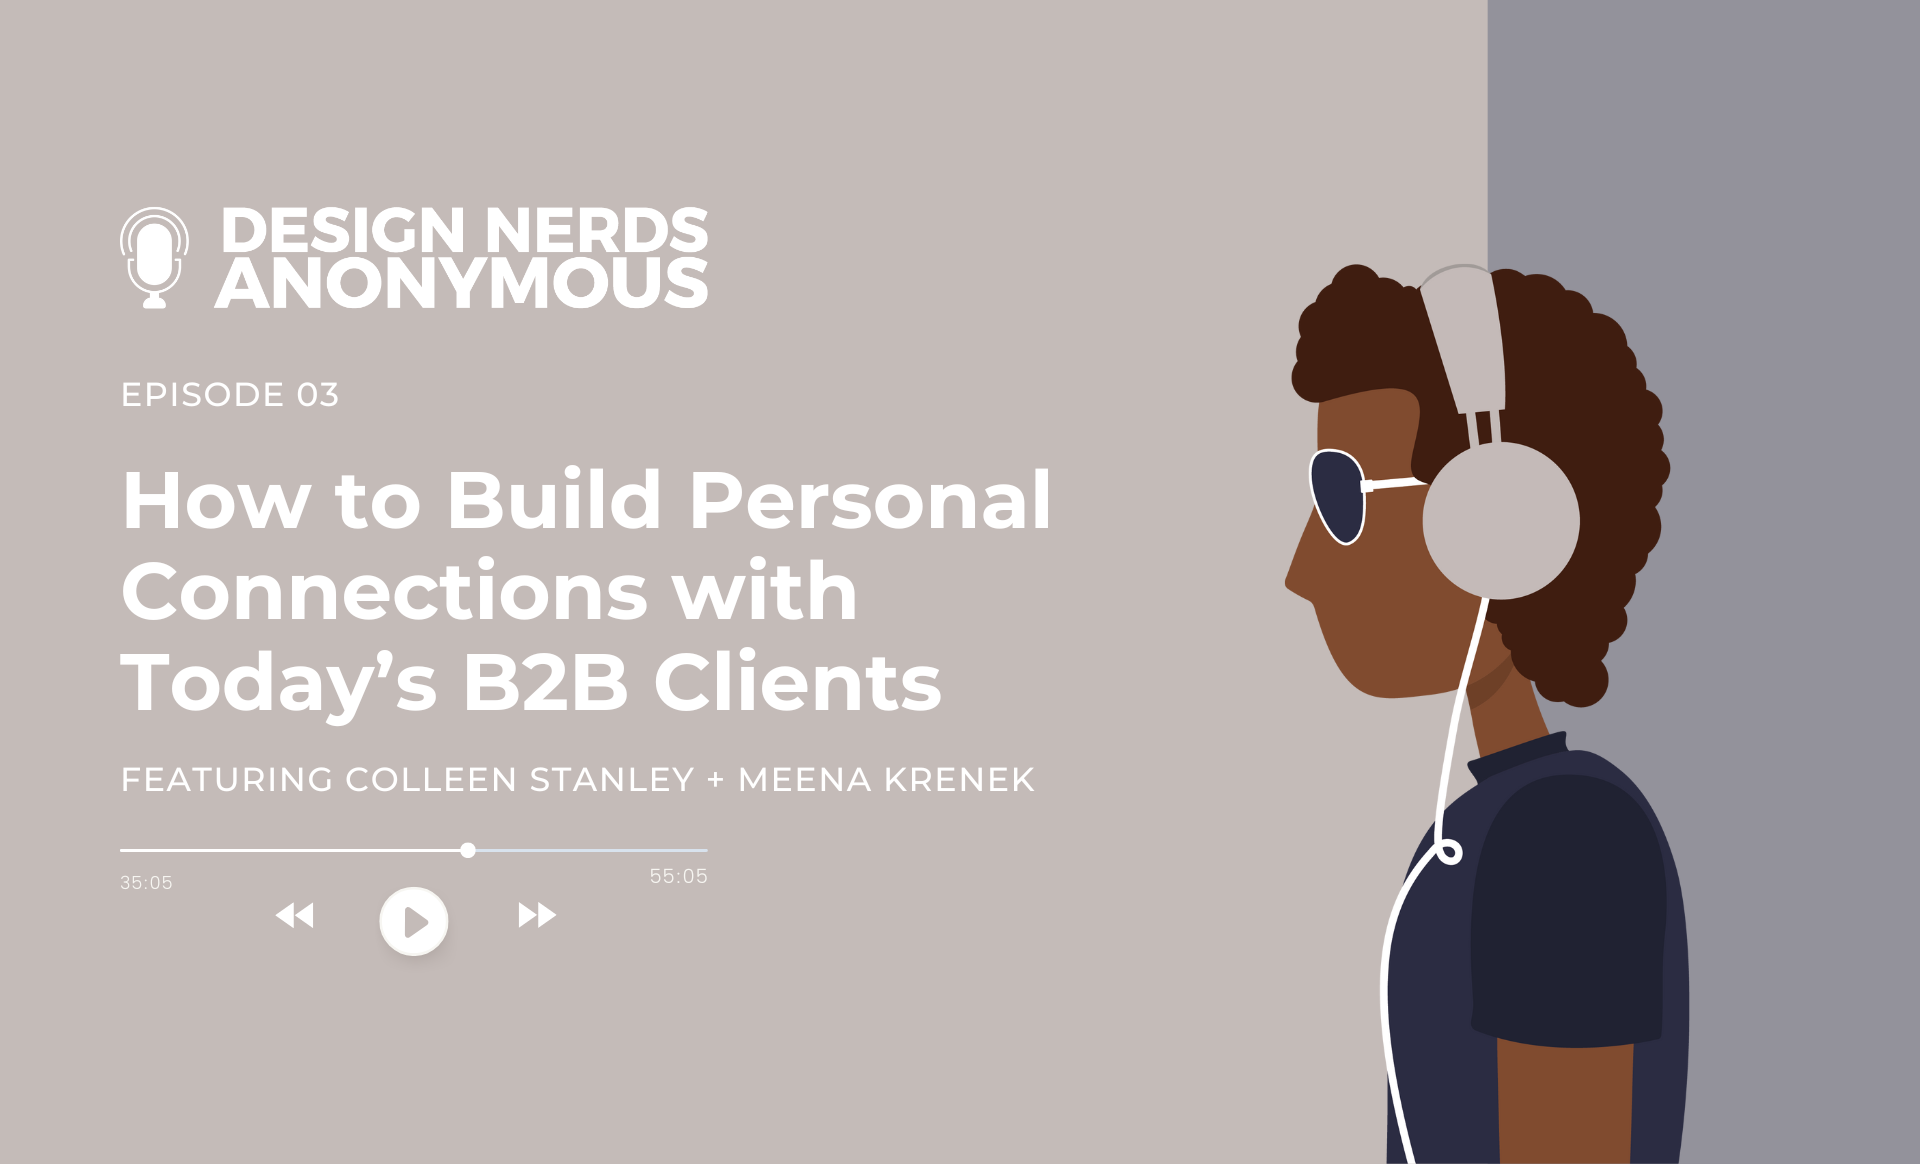 ThinkLab Design Nerds Anonymous Podcast on Personal Connections with B2B Clients